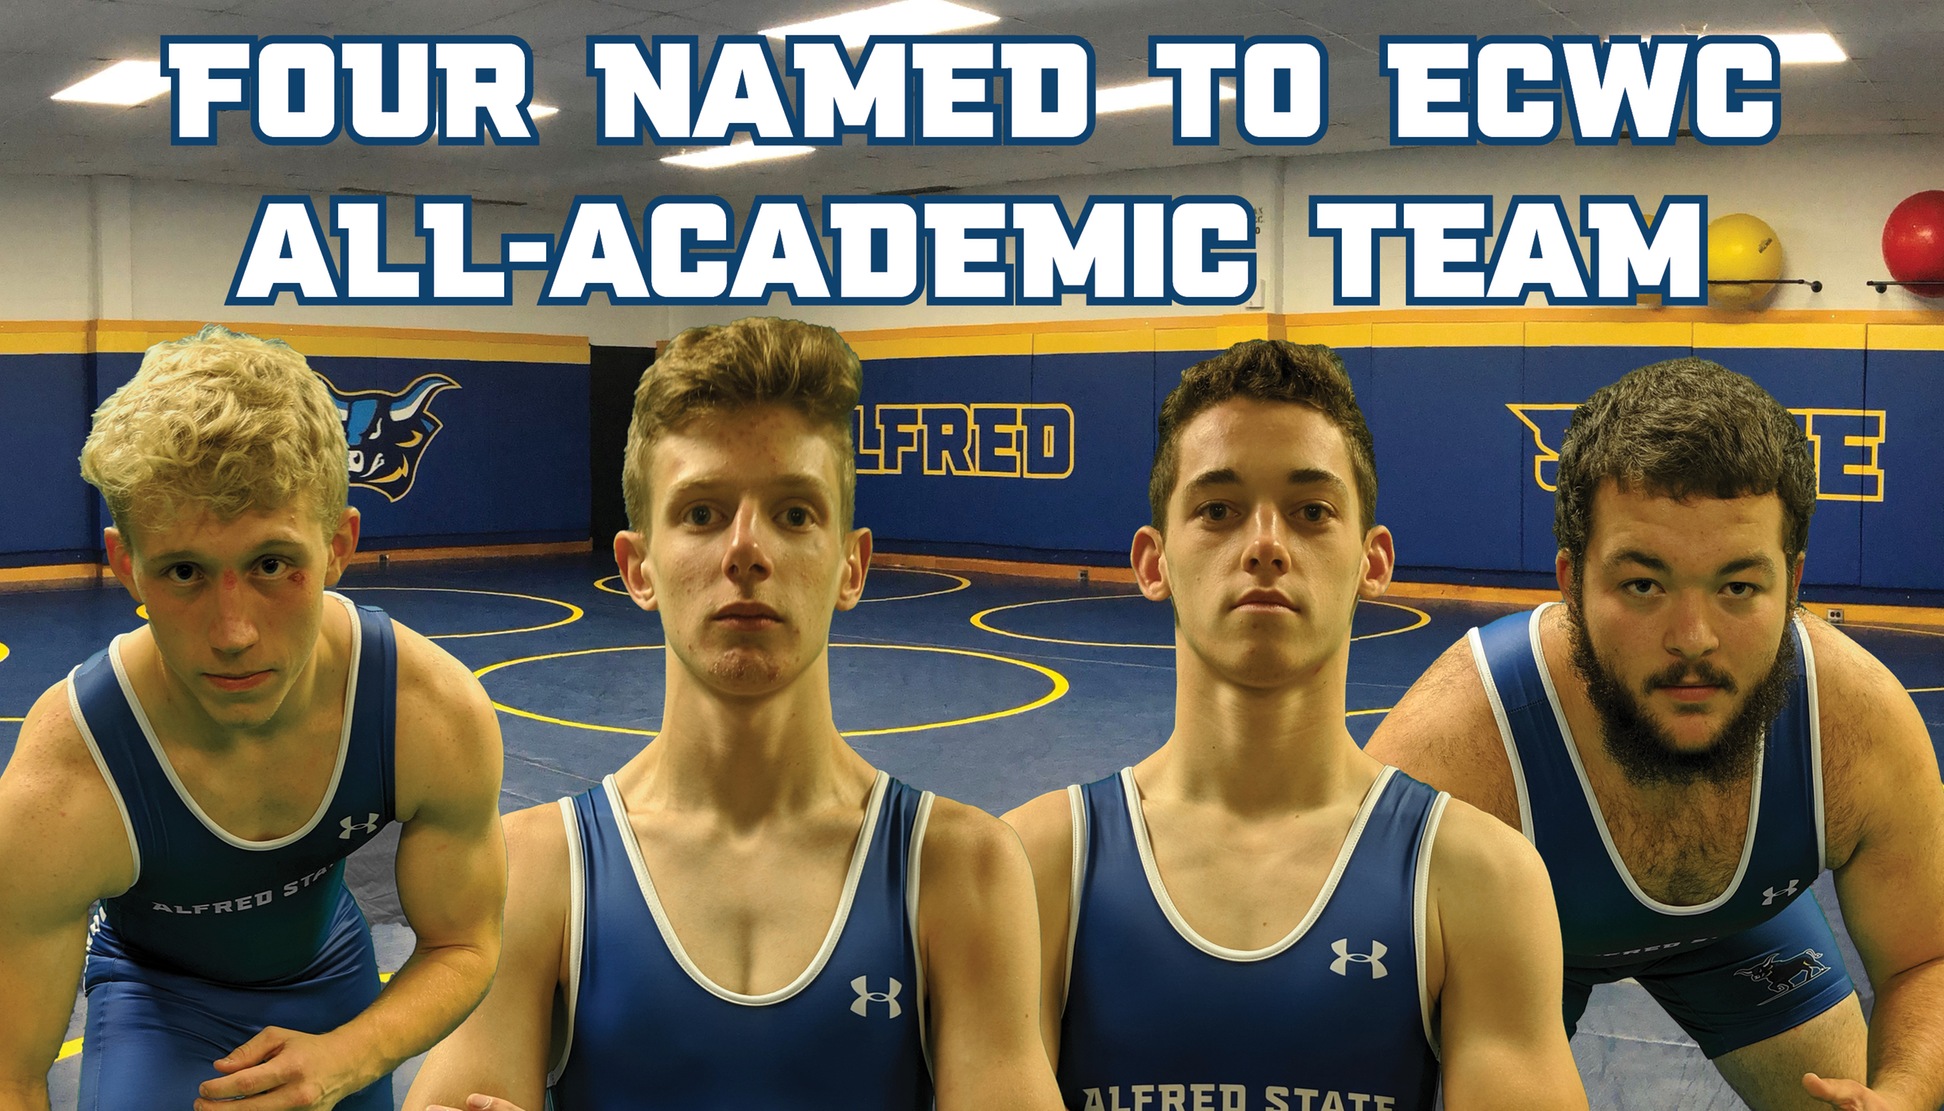 Cale Bartosch, Paul Knapp, Blake Ilges, and Kyle Fitzgerald named to the ECWC All-Academic Team.